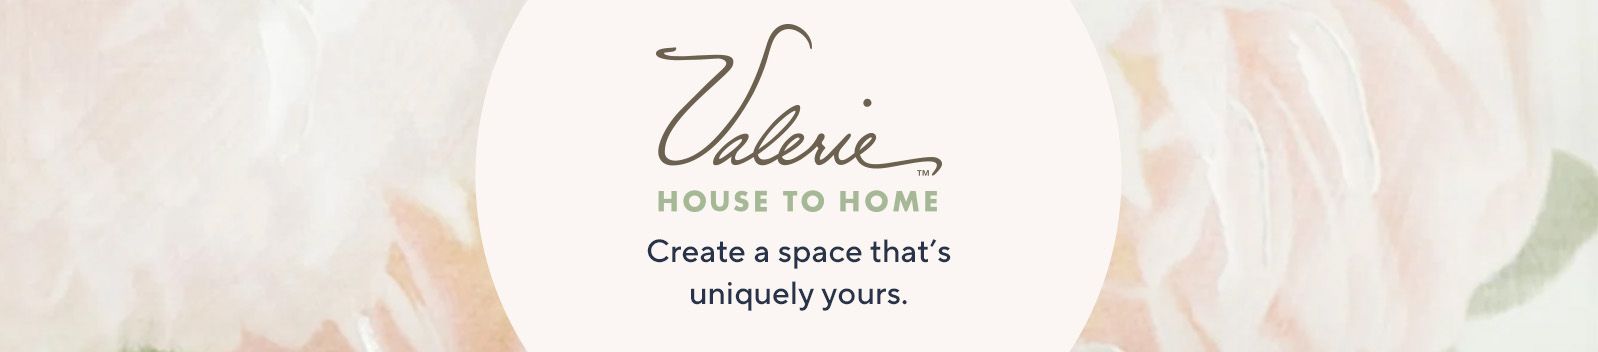 Valerie House to Home.  Create a space that's uniquely yours.